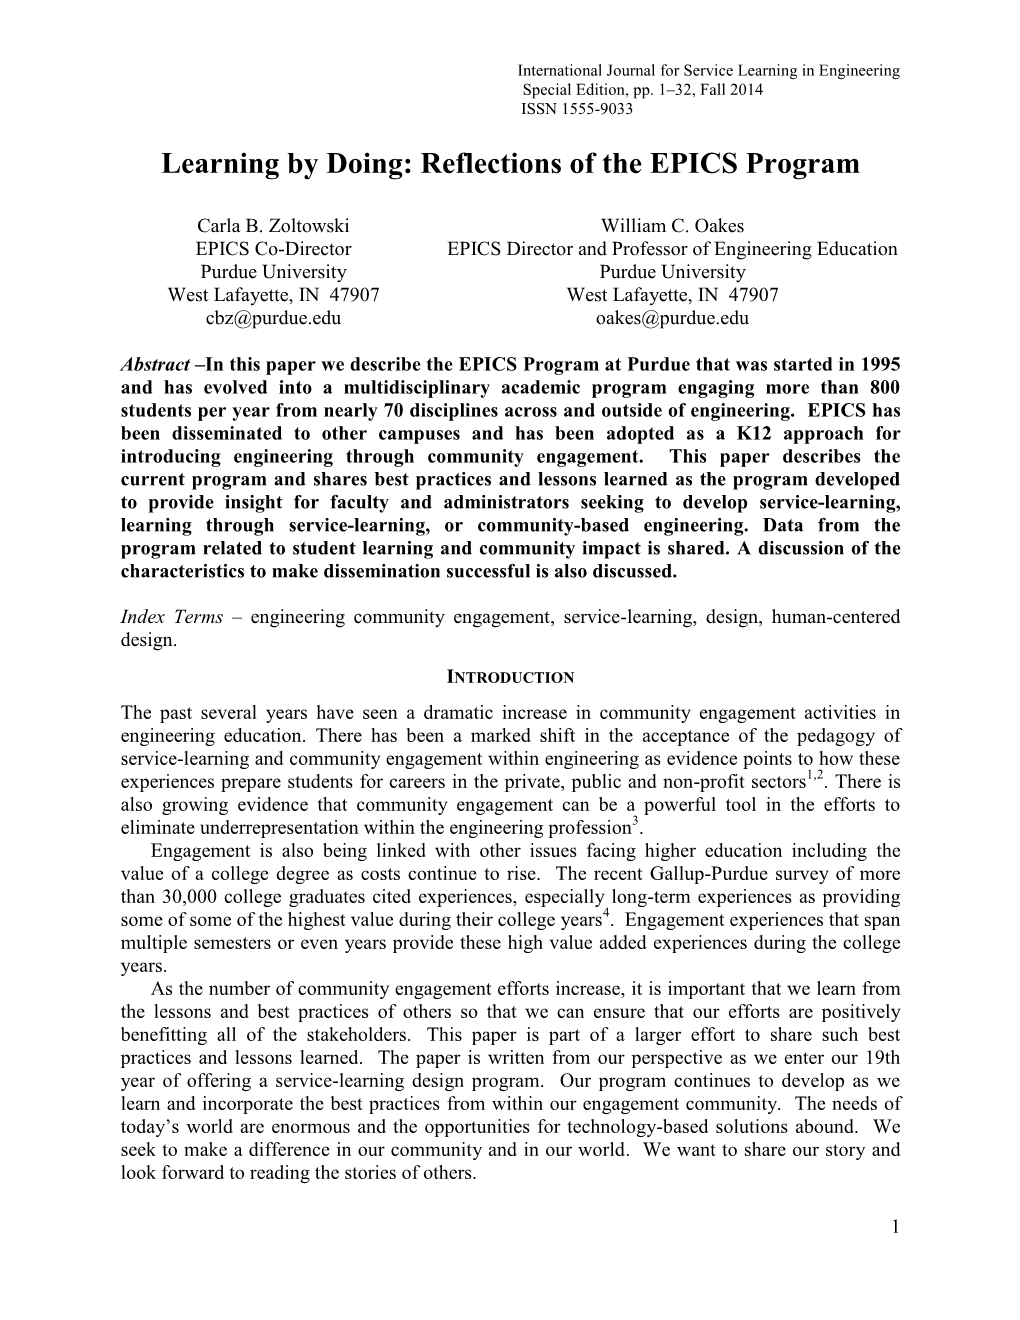 Learning by Doing: Reflections of the EPICS Program